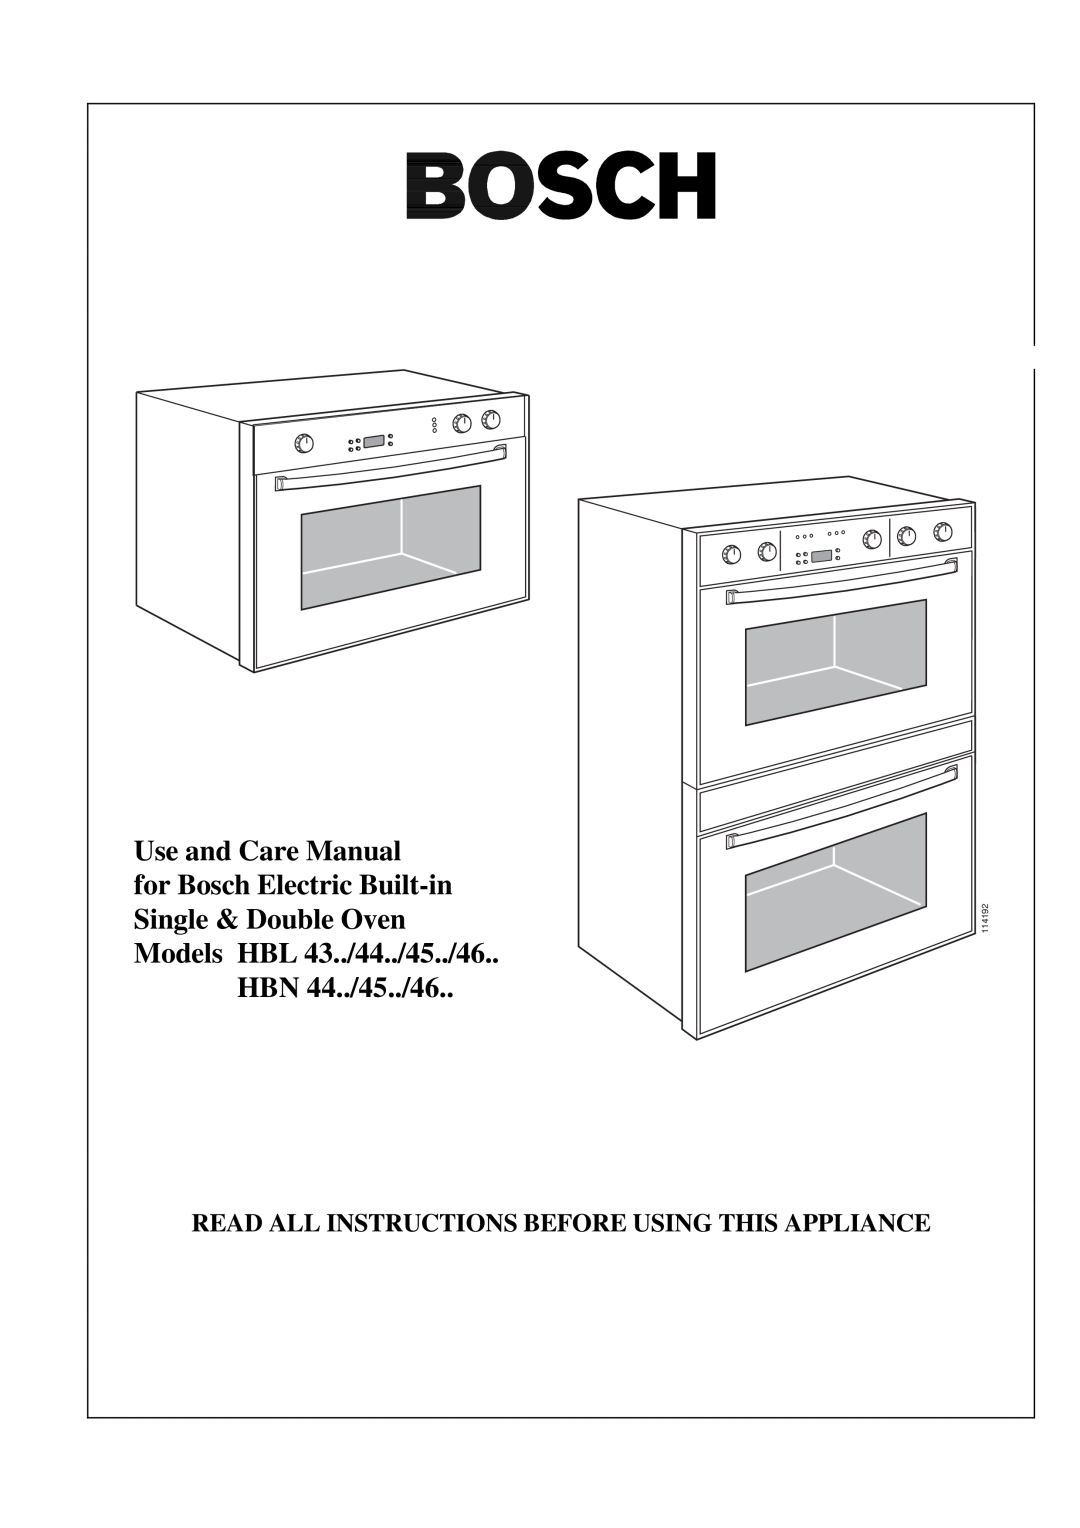 Bosch Appliances HBL 45 Read All Instructions Before Using This Appliance, Use and Care Manual, HBN 44../45../46, 114192 